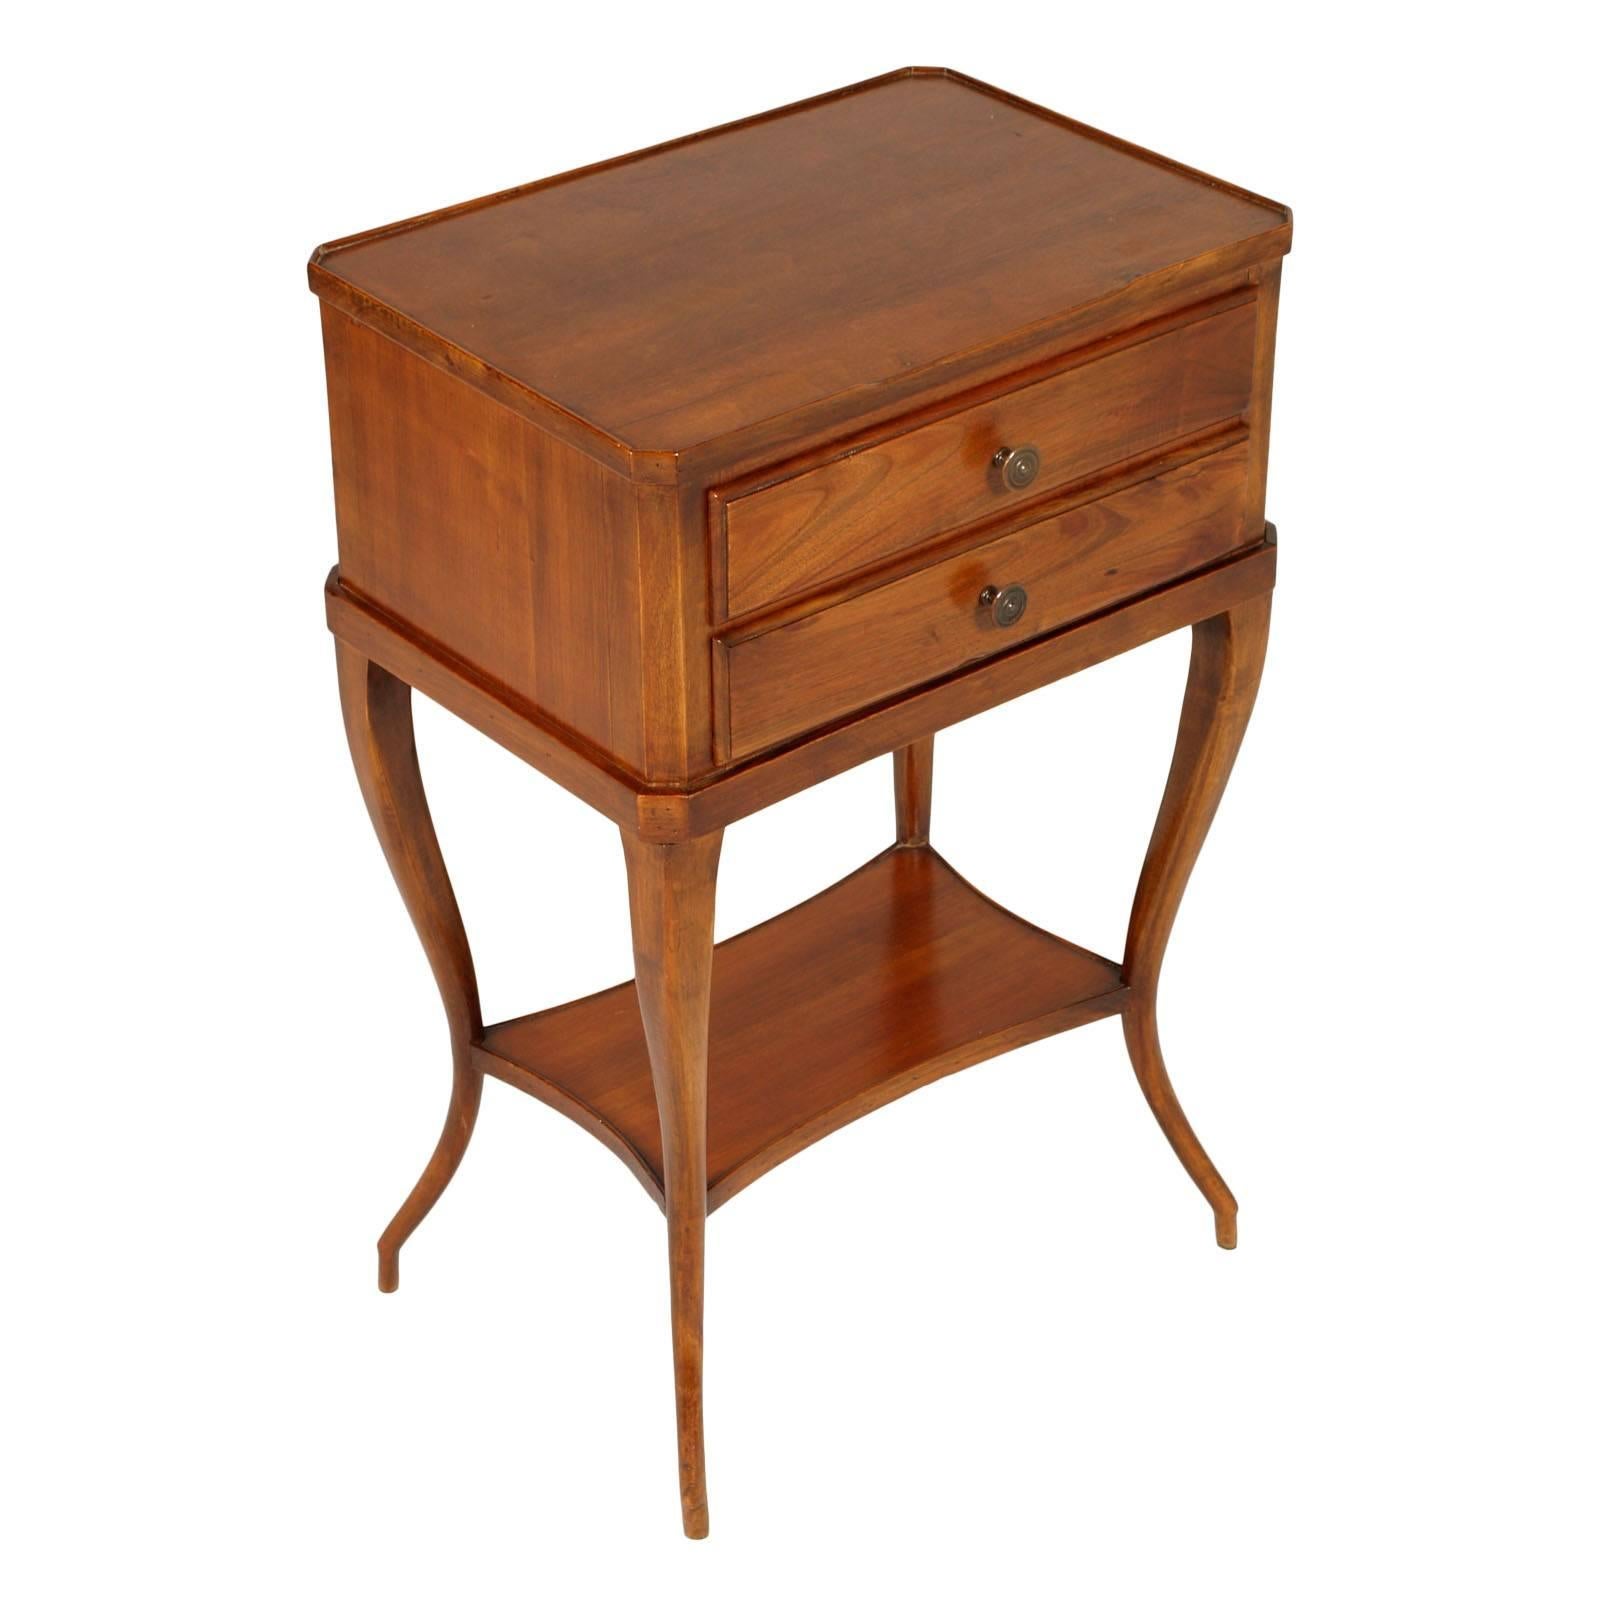 Early 20th Century French Louis XVI Table, Cabinet Nightstand in Walnut Polished